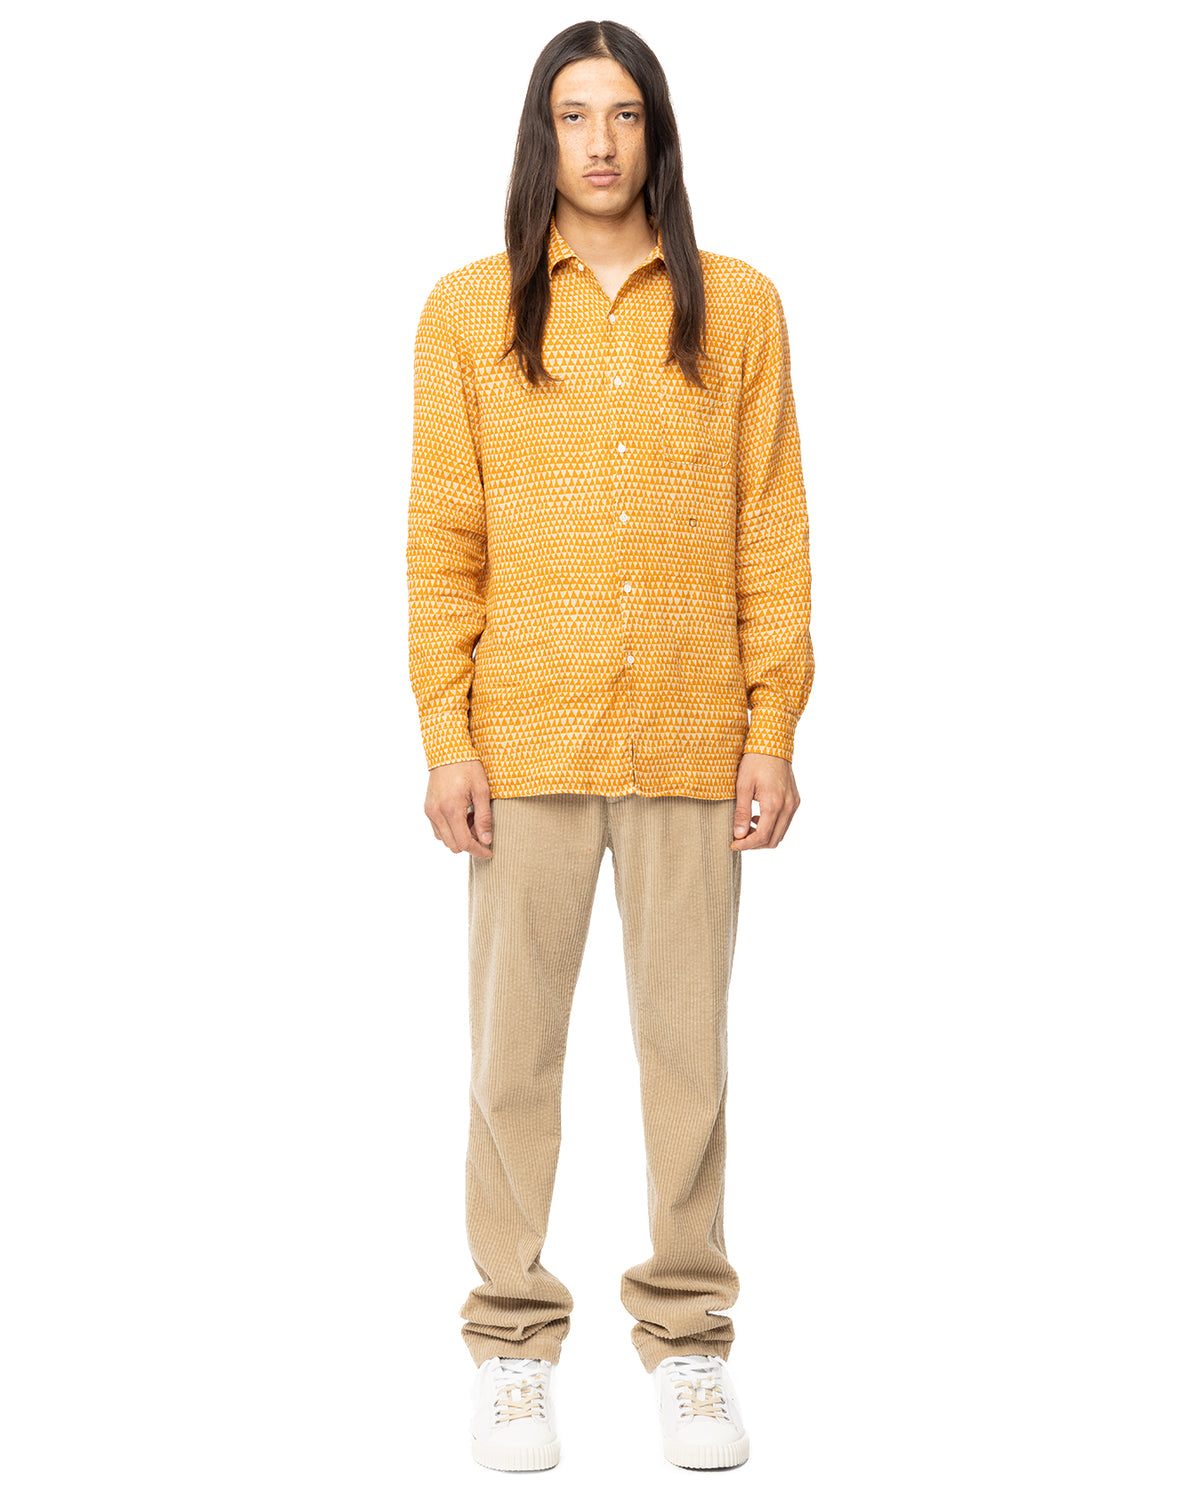 Bowles Pattern Long Sleeve Button Up - Orzo